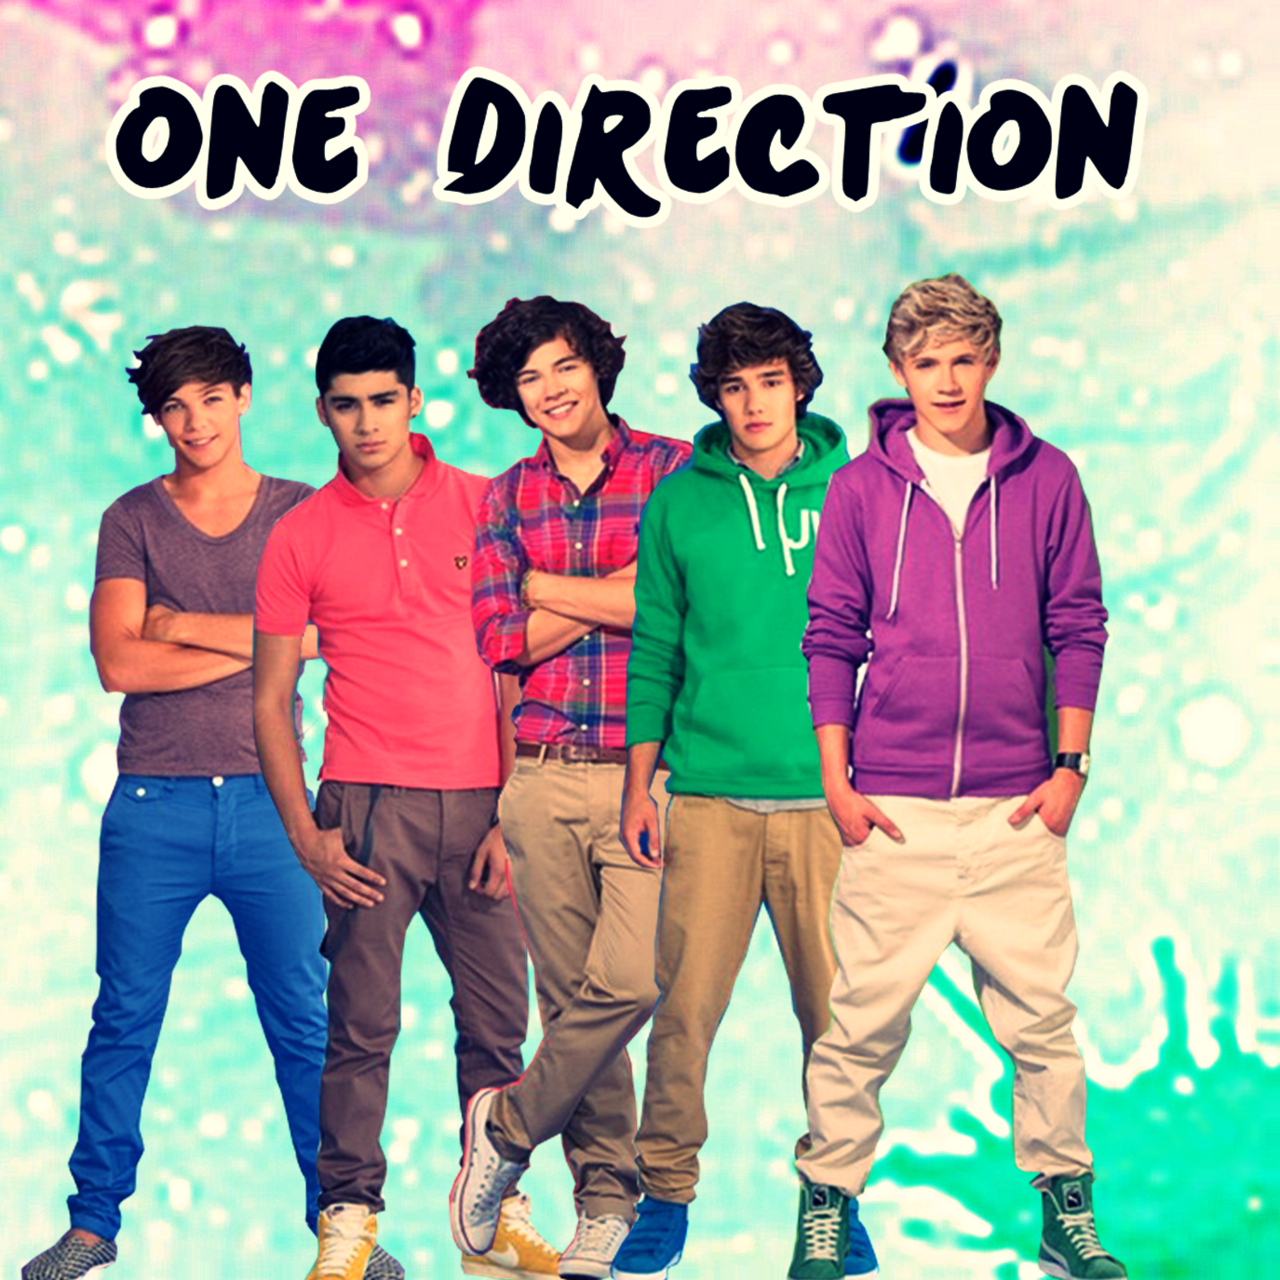 One direction wallpaper by kika1133 on